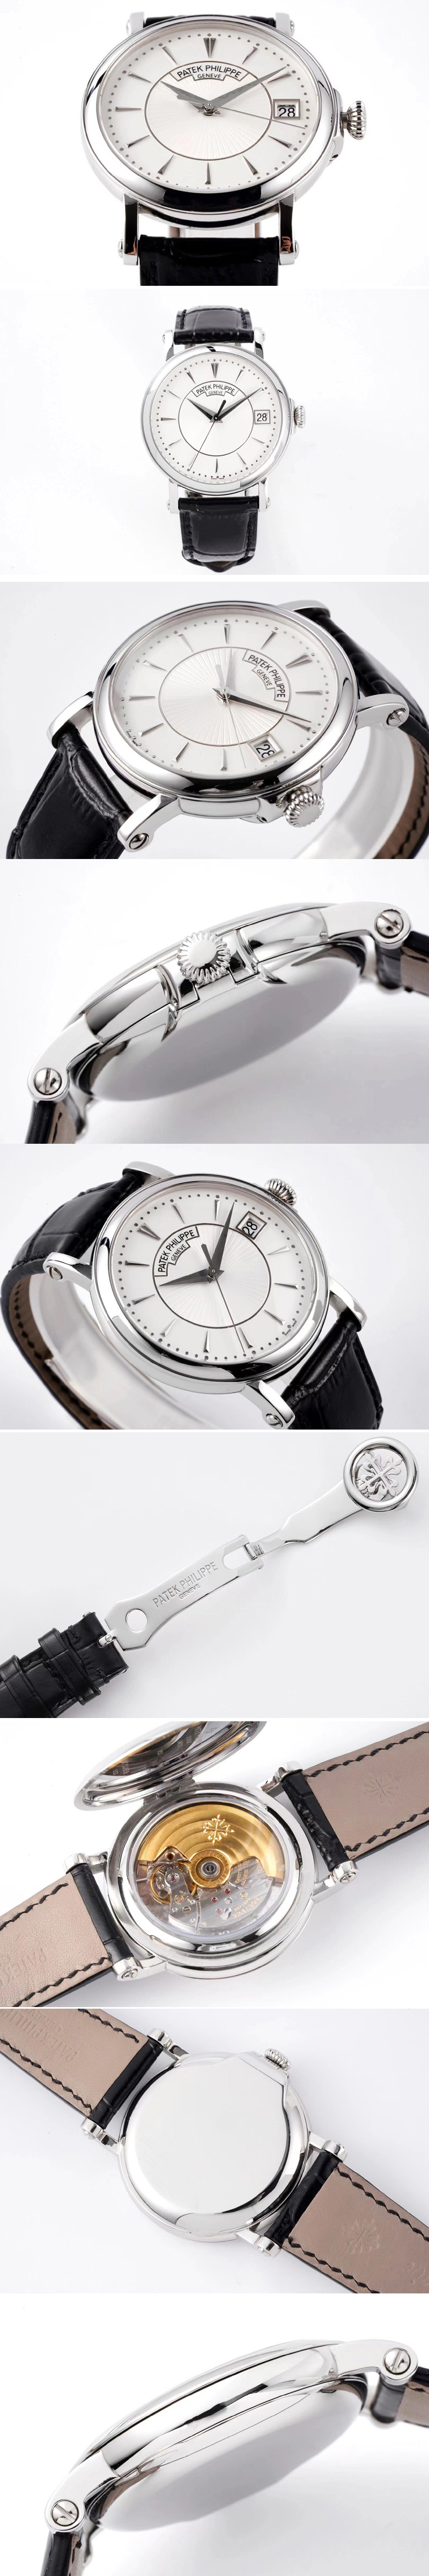 Replica Patek Philippe Calatrava 5153G-010 SS ZF 1:1 Best Edition White textured dial on Black Leather Strap A324CS